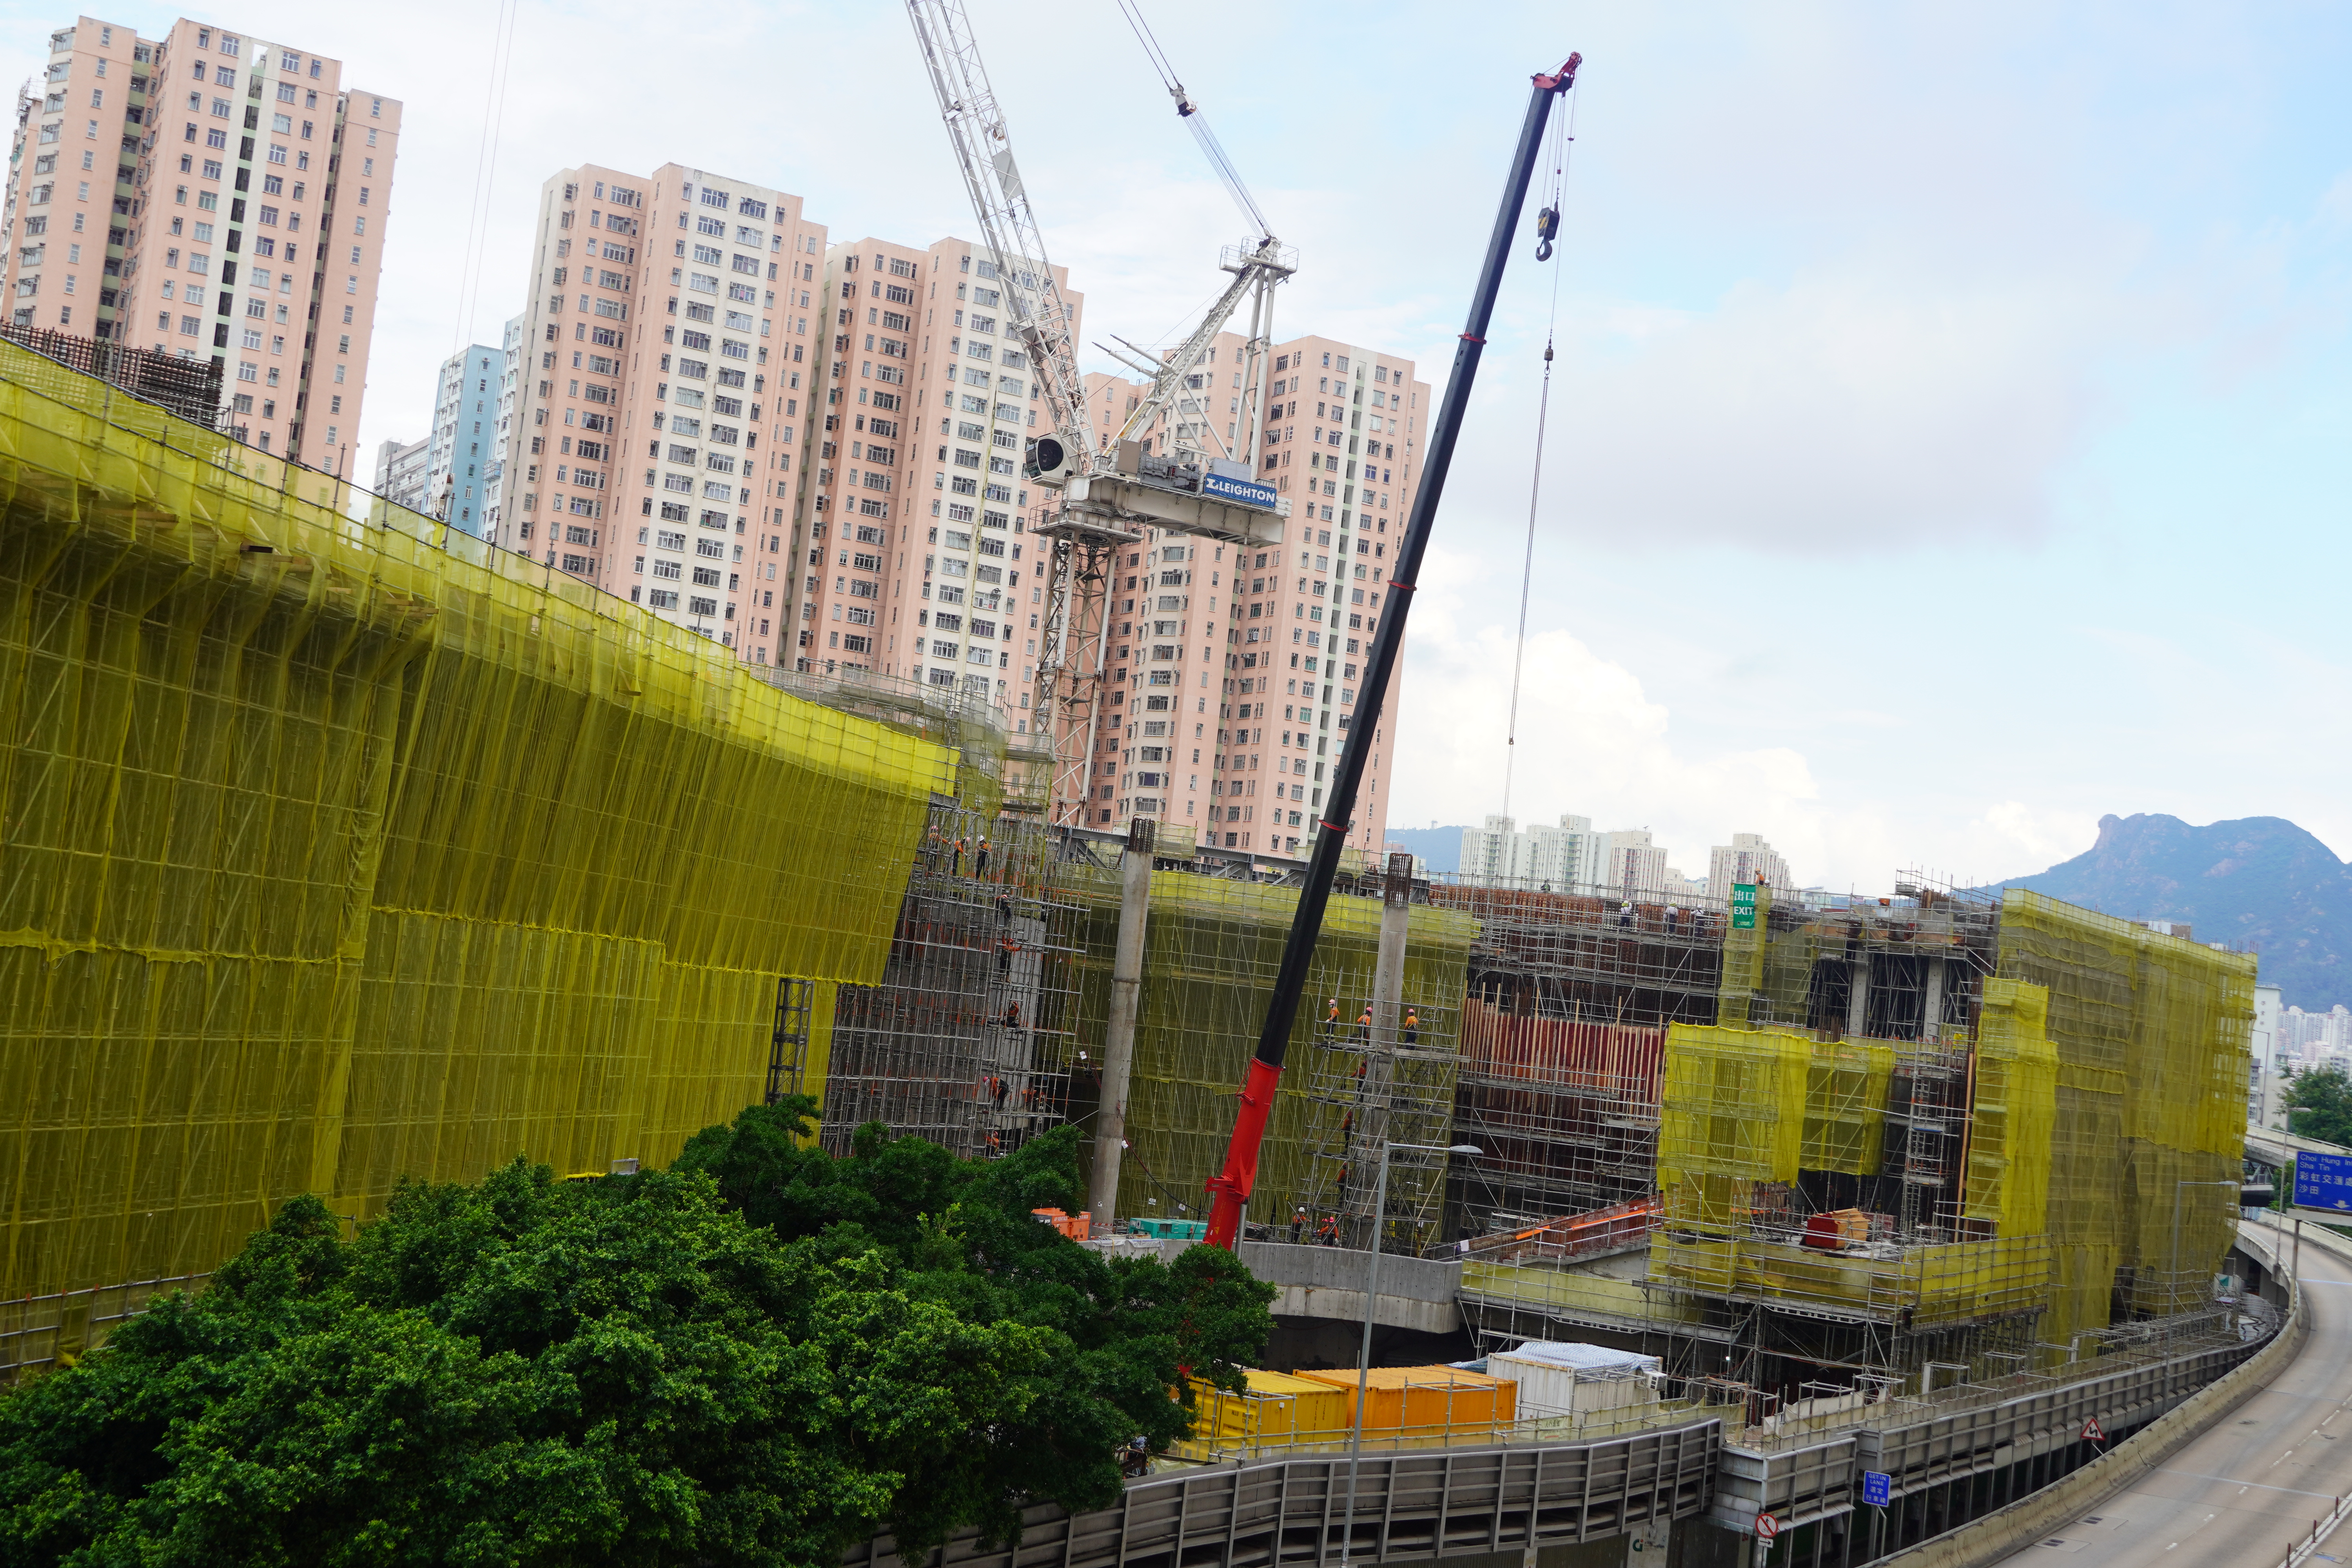 Construction of the East Kowloon Cultural Centre in Kowloon Bay